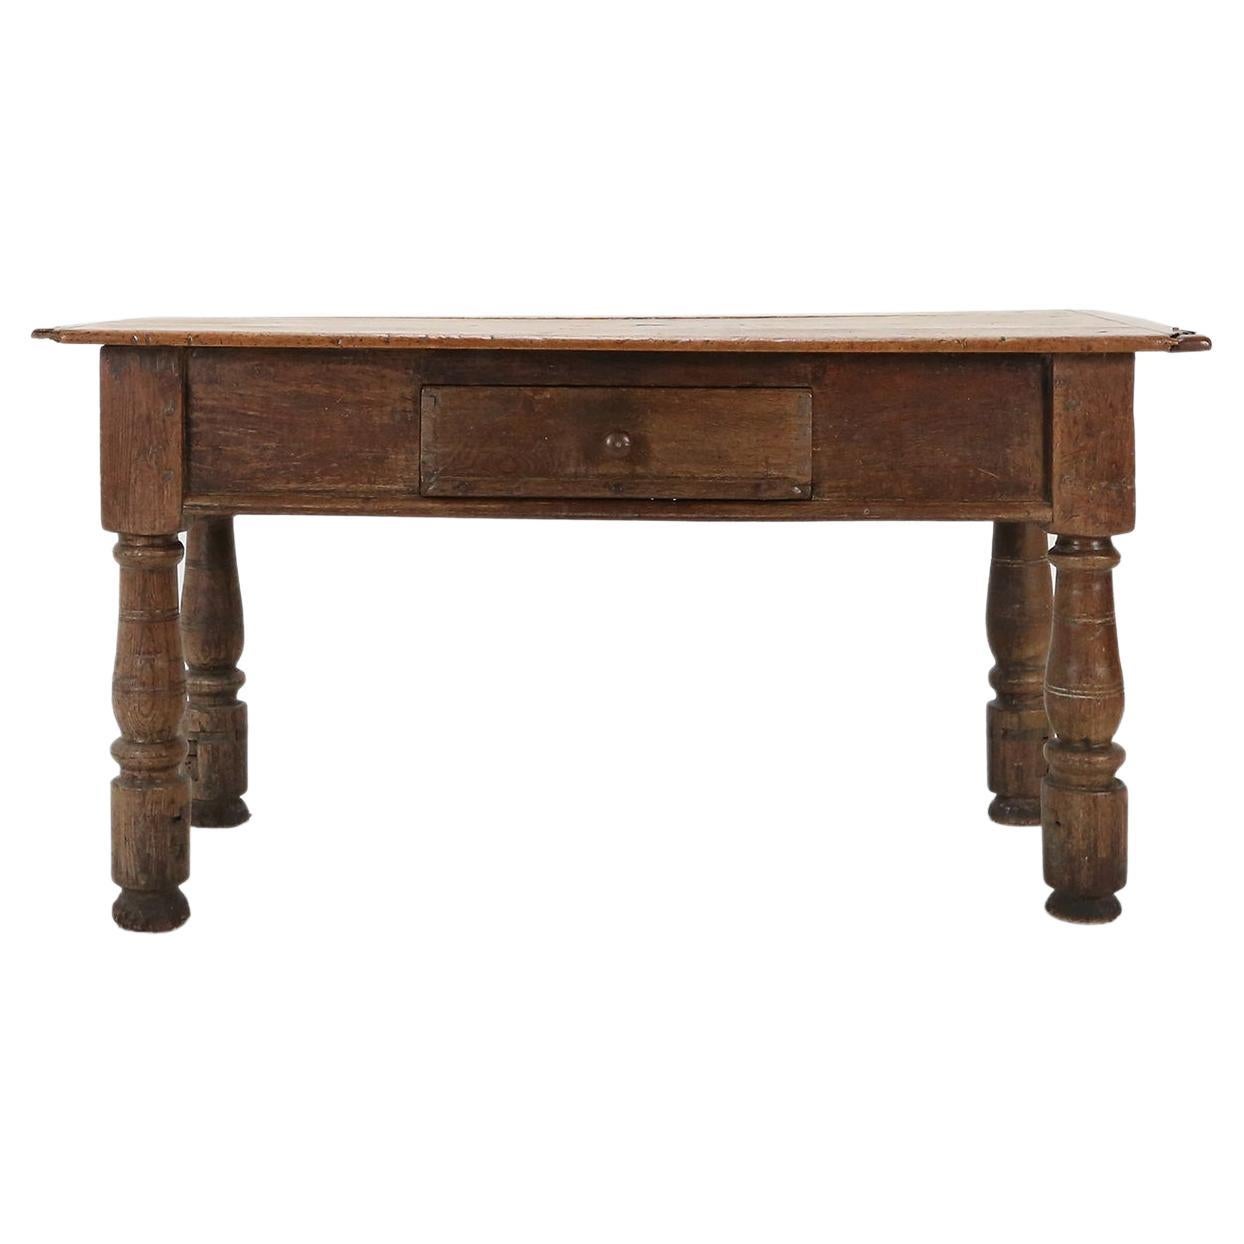 18th Century Console Table